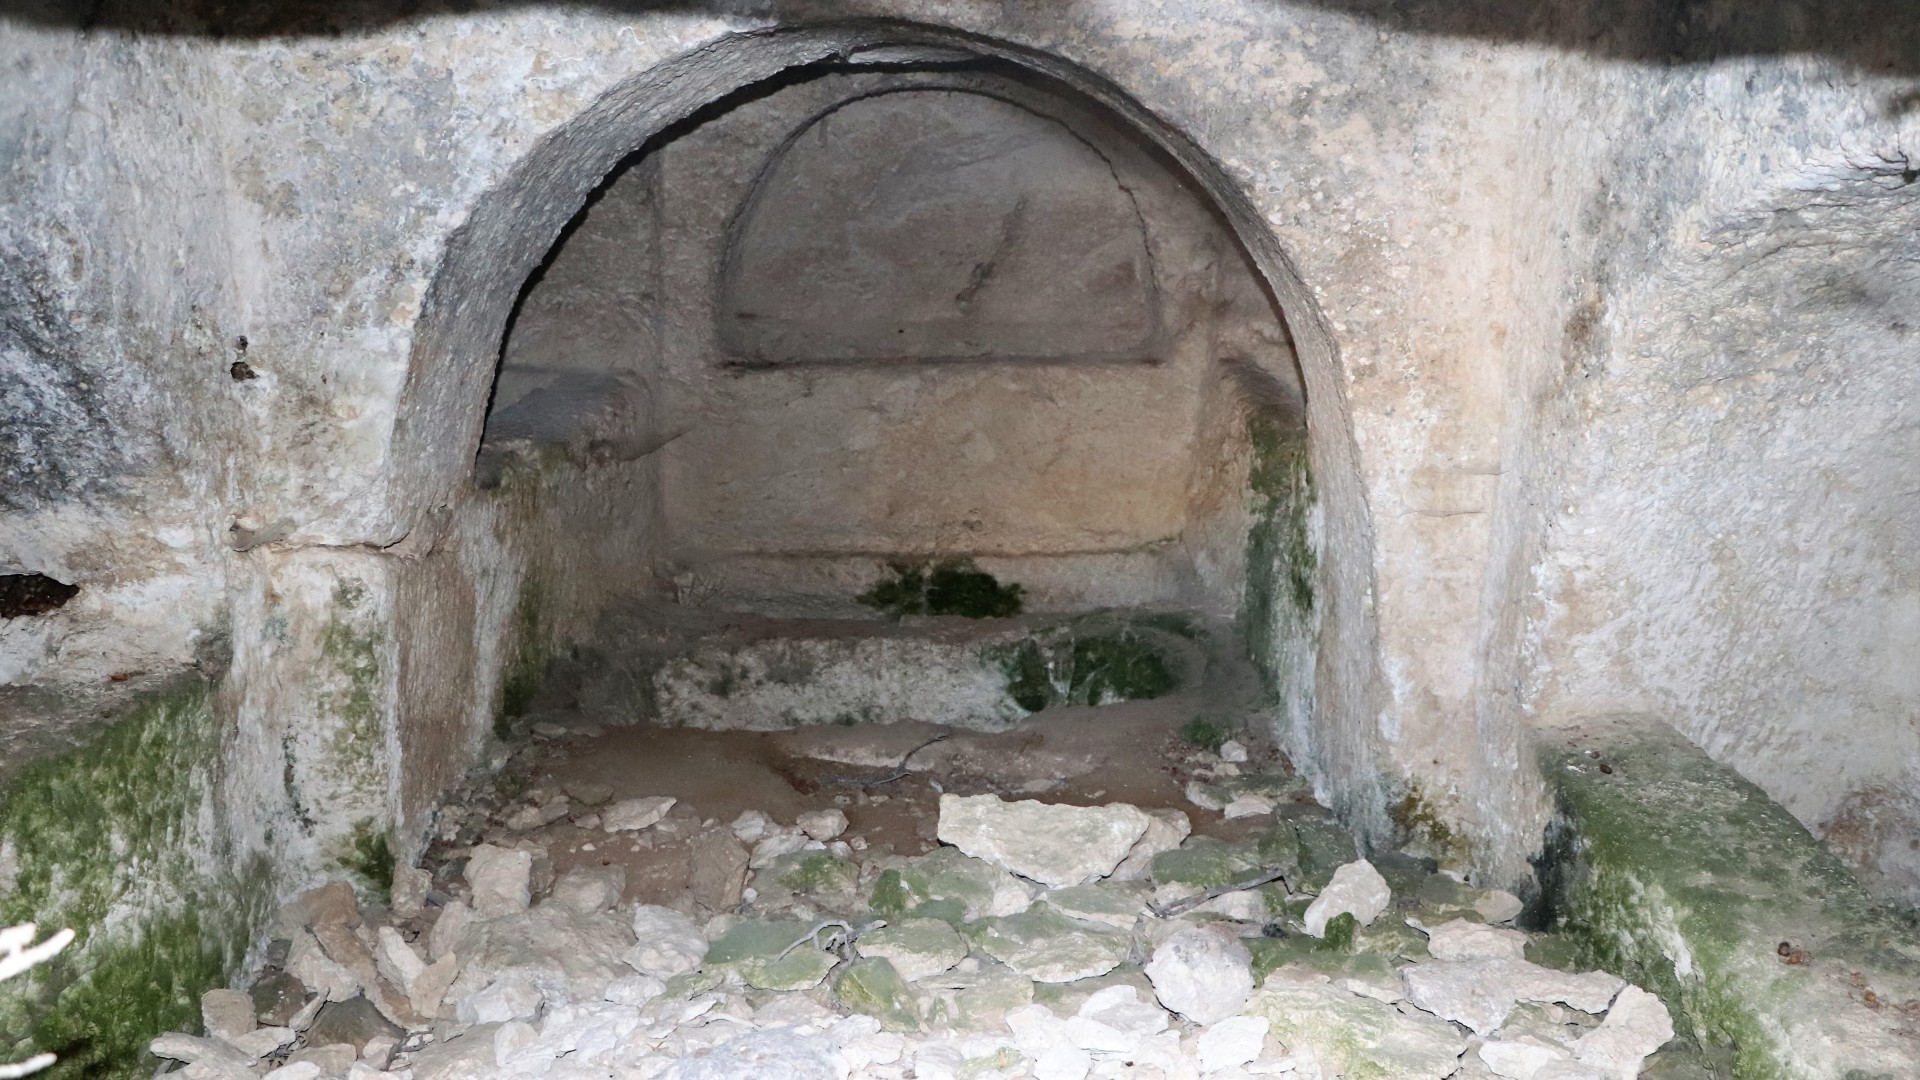 One of the rock-cut chamber tombs, with the sarcophagus carved into the floor.